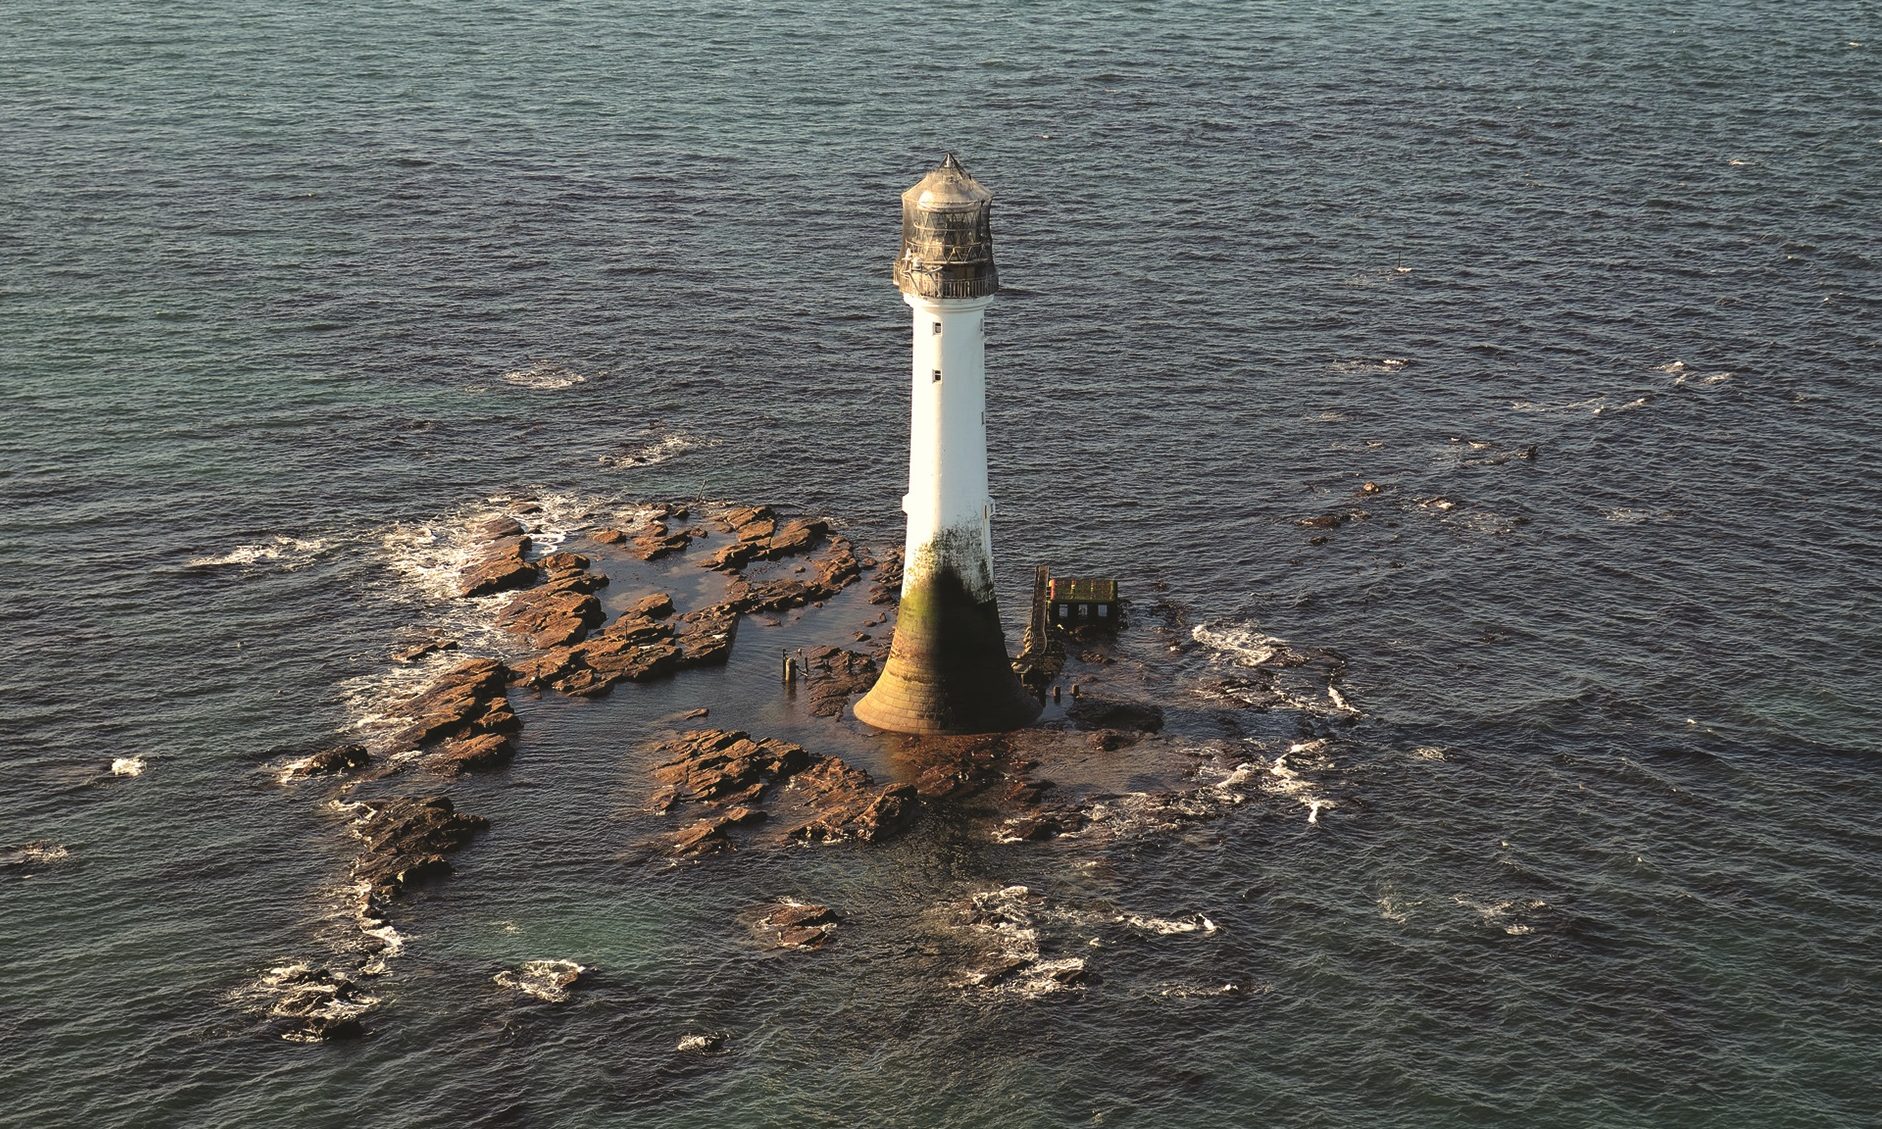 The 209-year-old Bell Rock lighthouse.